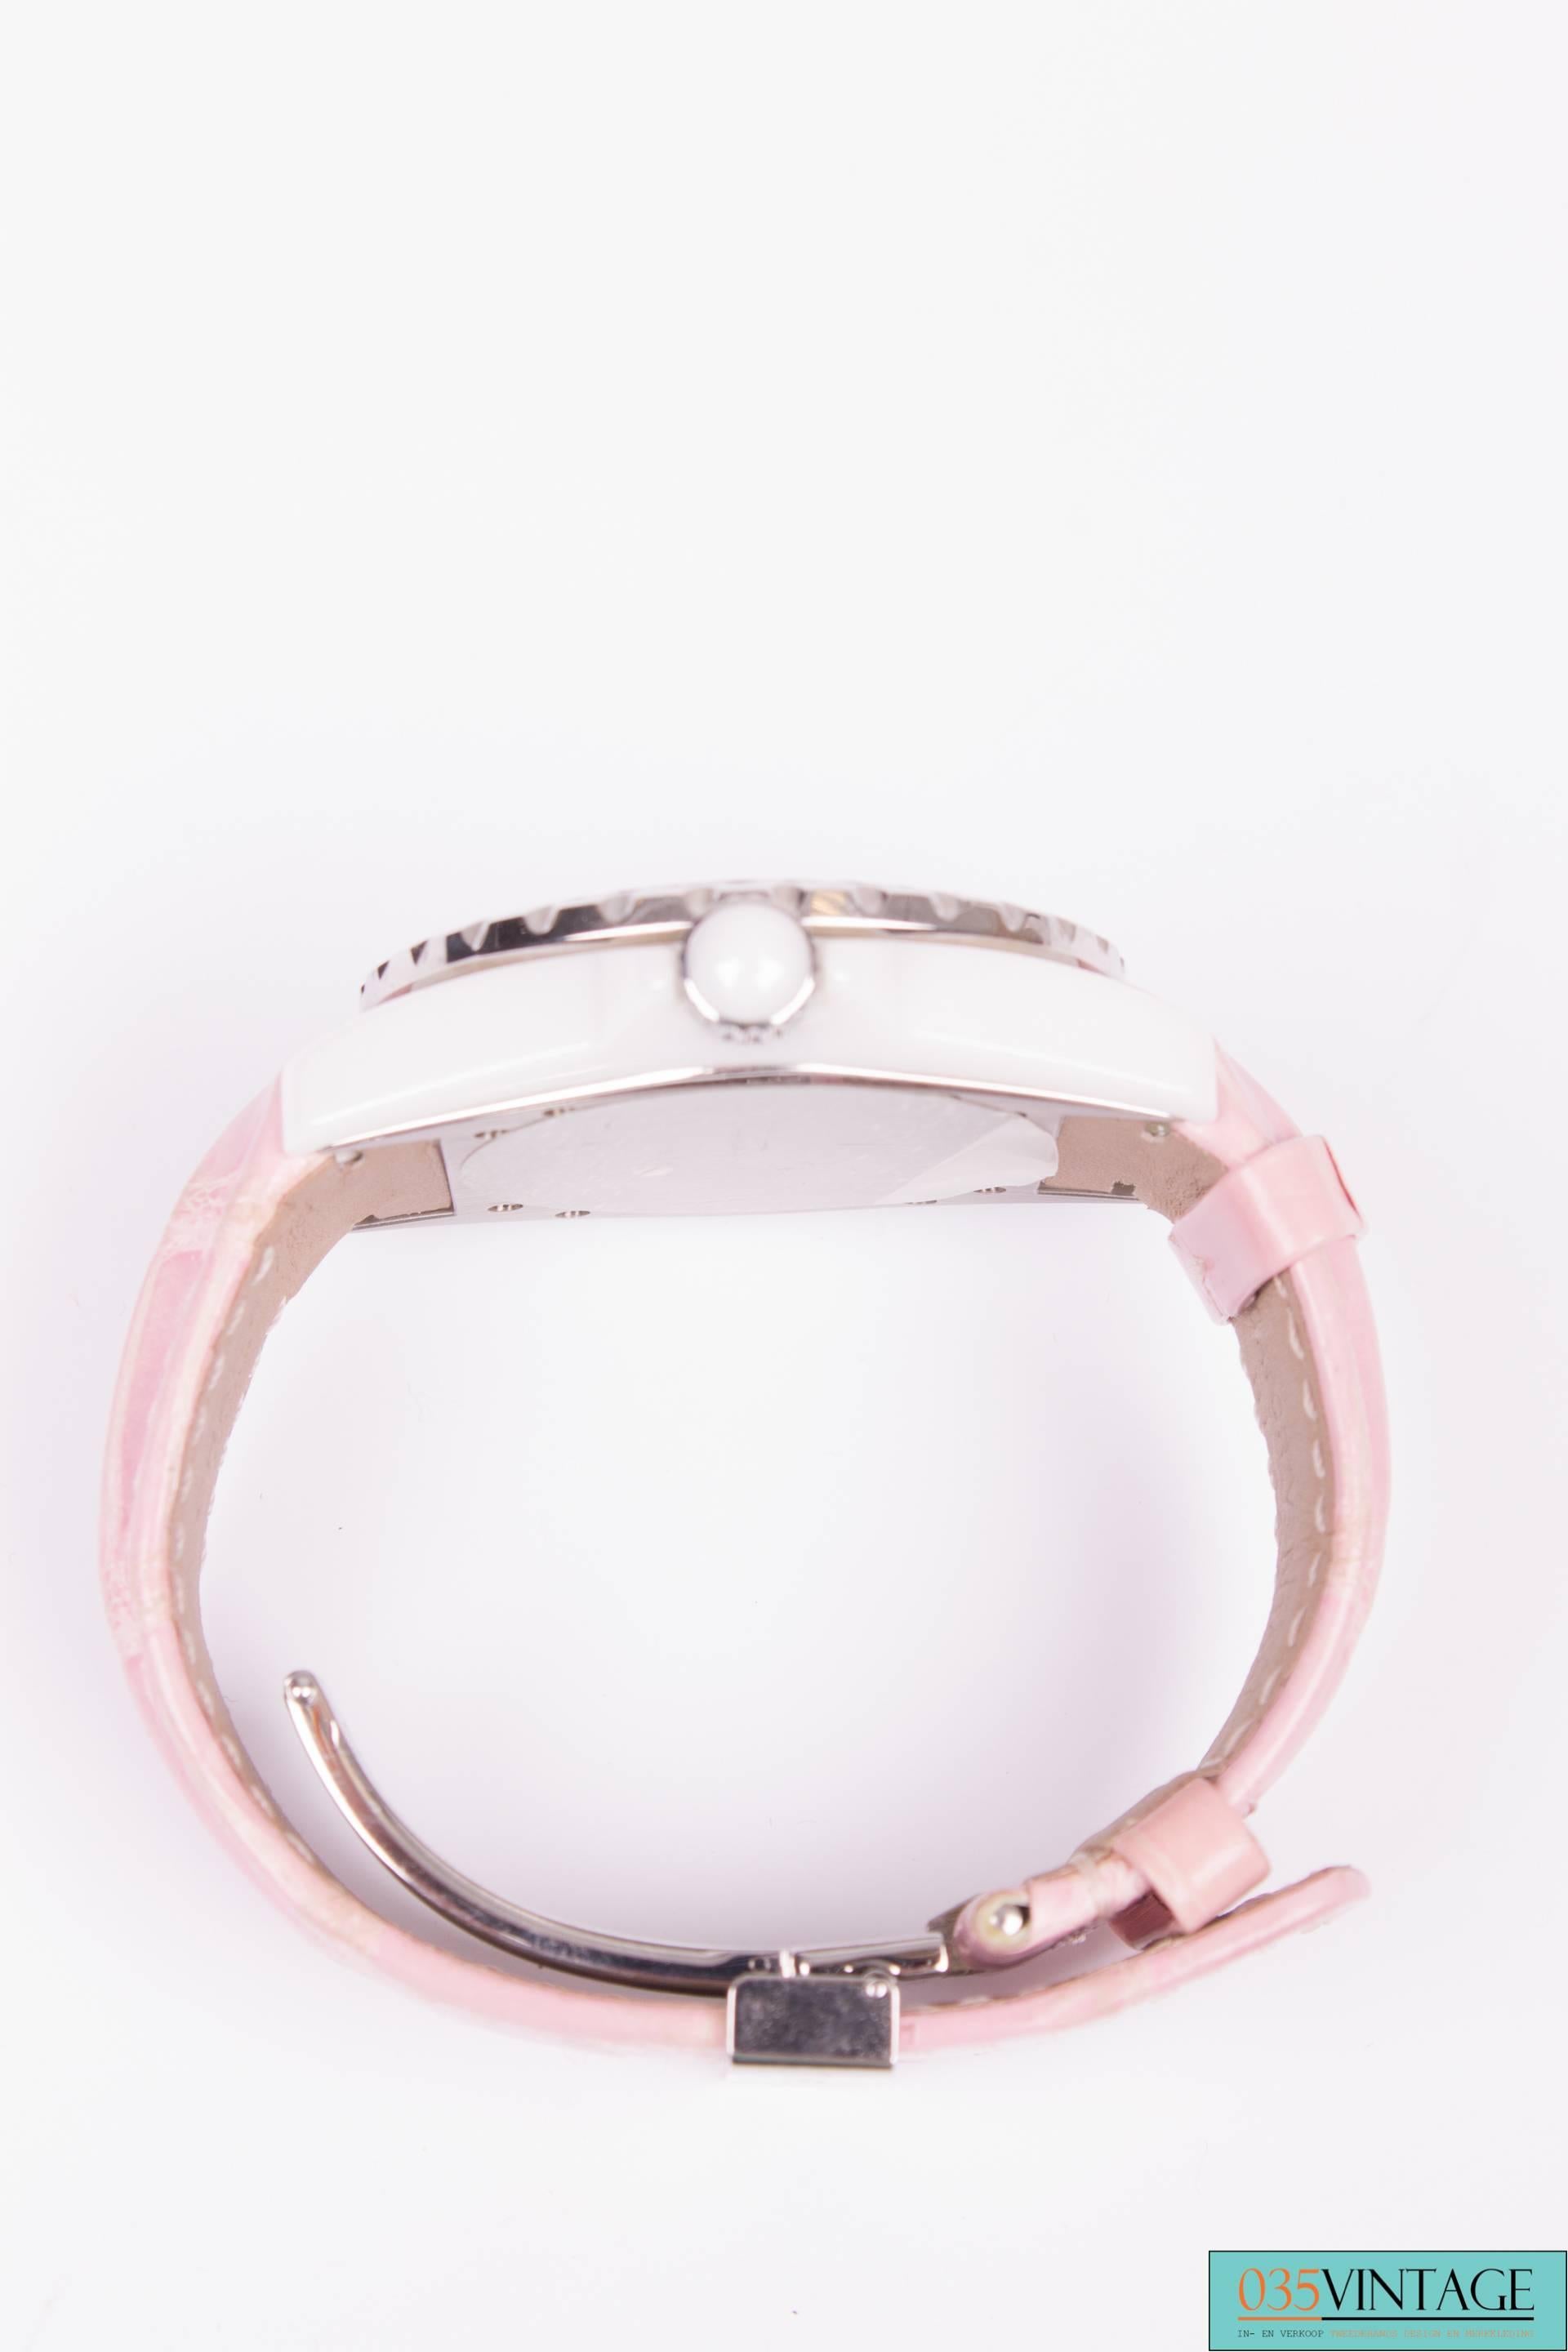 chanel pink watch